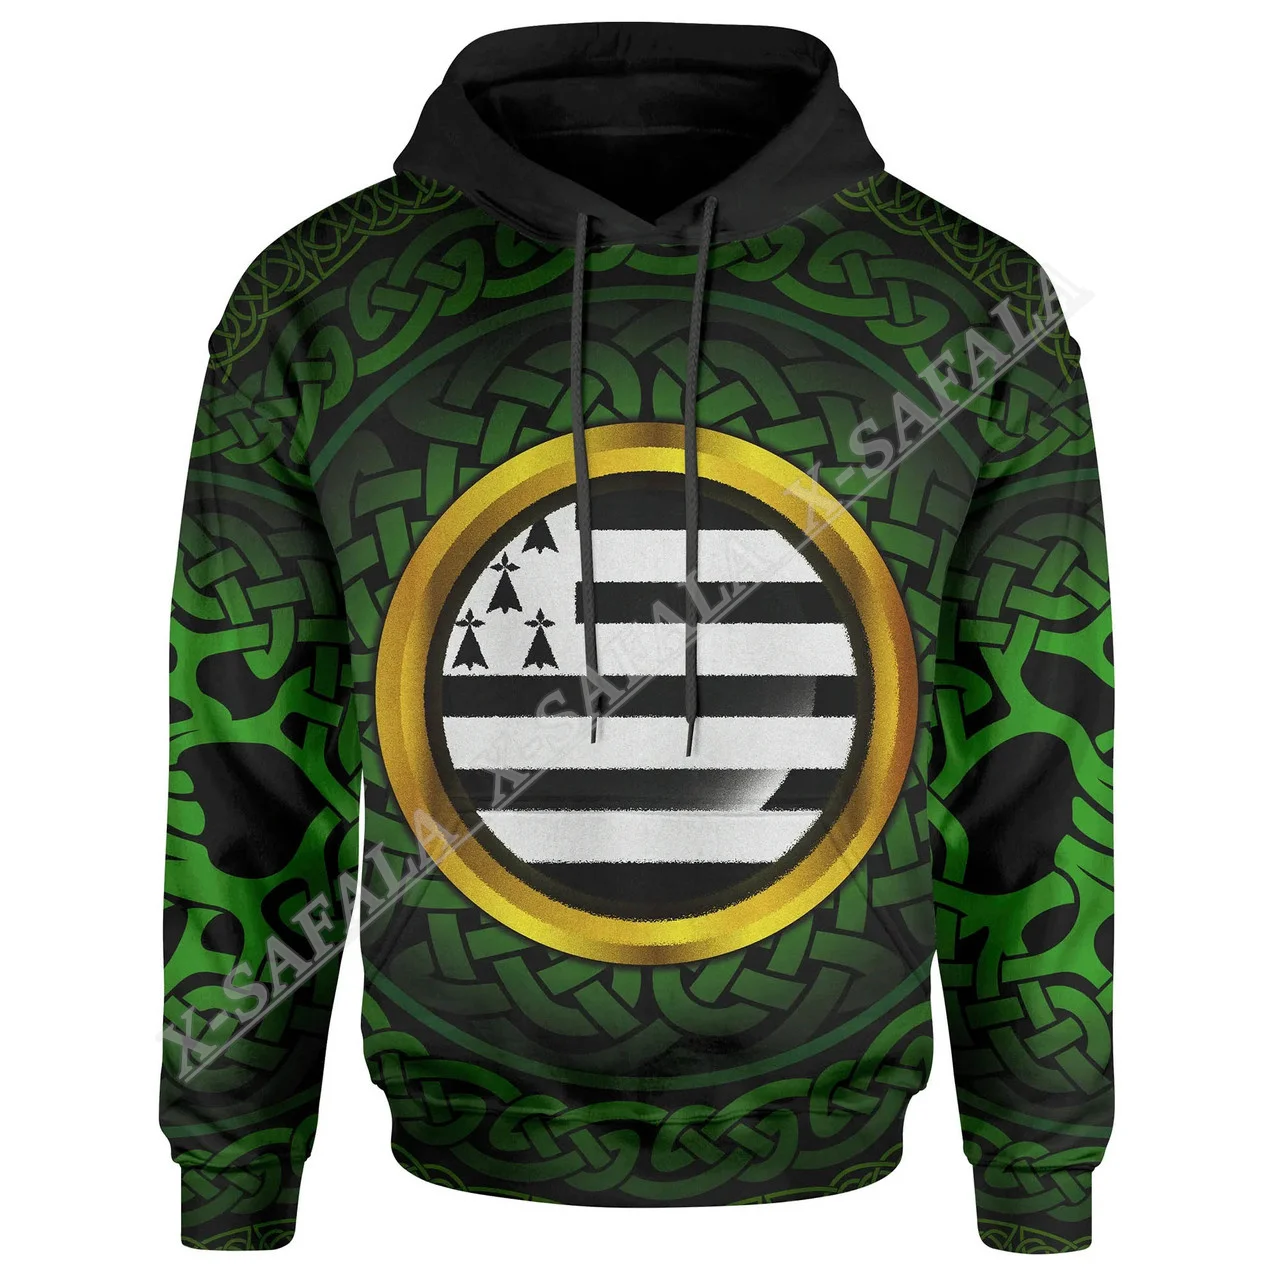 

Bretagne Rugby Celtic Stoat And Ermine Flag 3D Print Zipper Hoodie Men Pullover Sweatshirt Hooded Jersey Tracksuit Outwear Coat